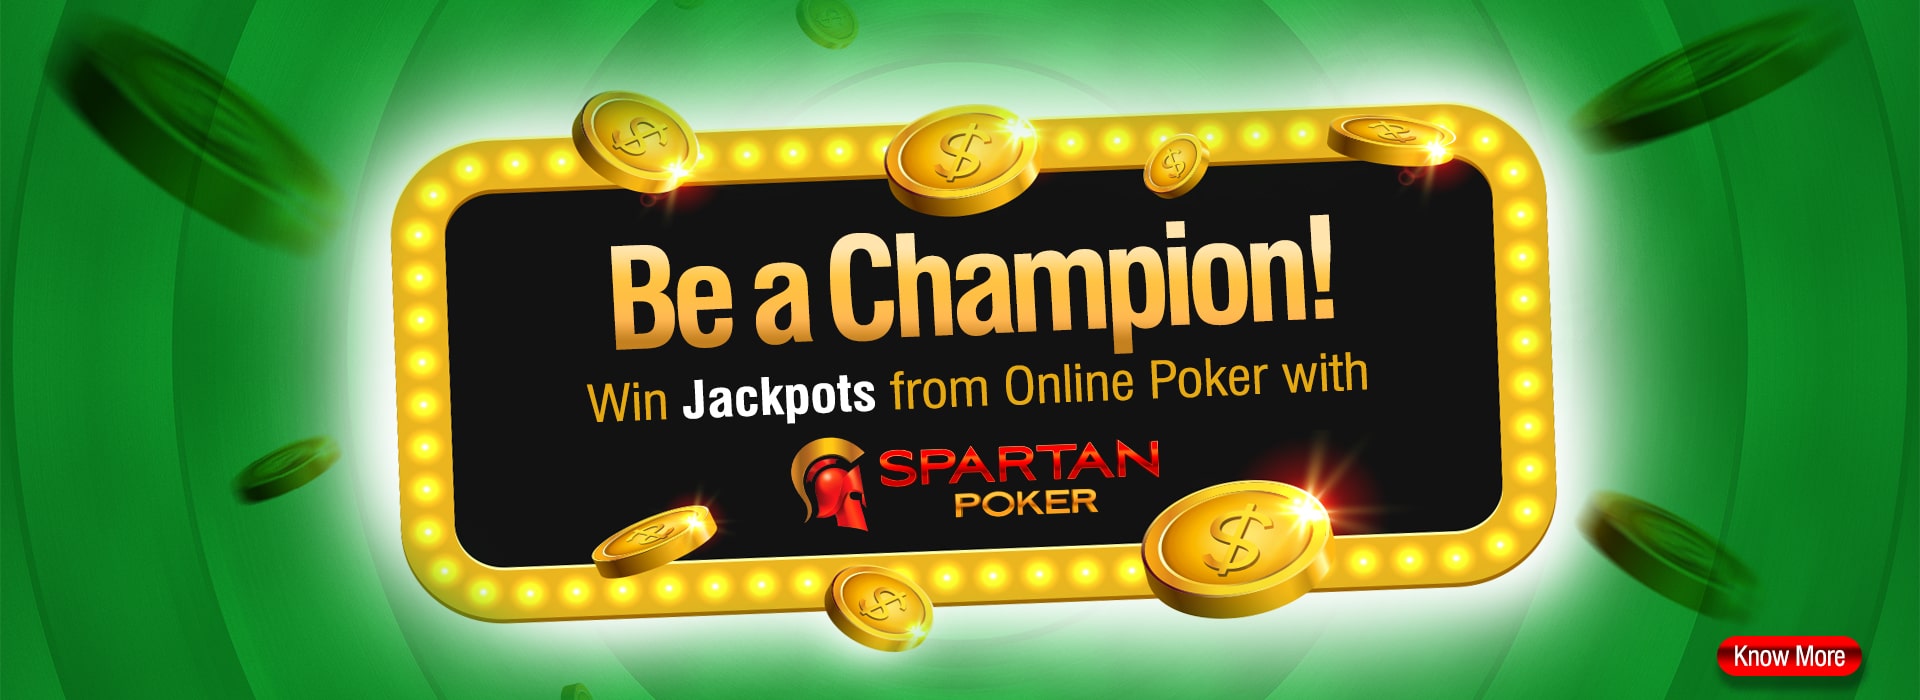 Tips to win jackpots from online poker with spartan poker